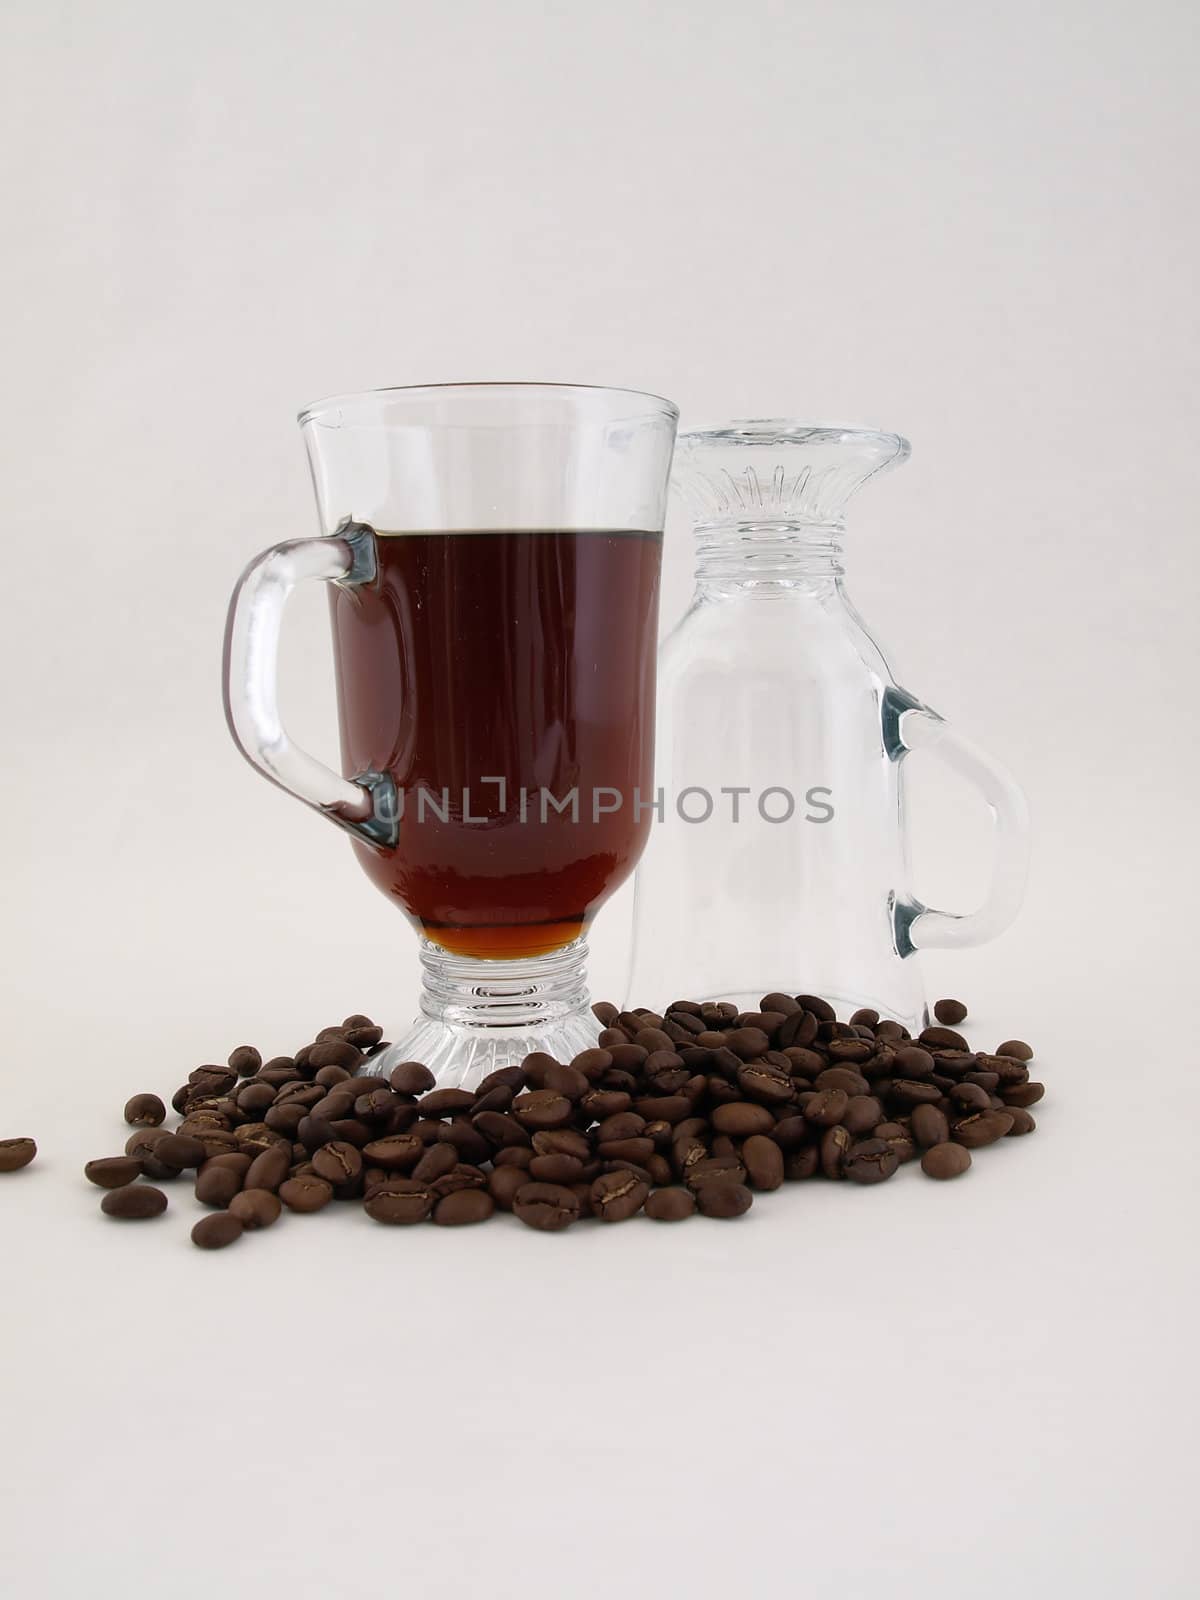 A hot glass of coffee sits next to an inverted glass amongst coffee beans. Isolated on a white background.